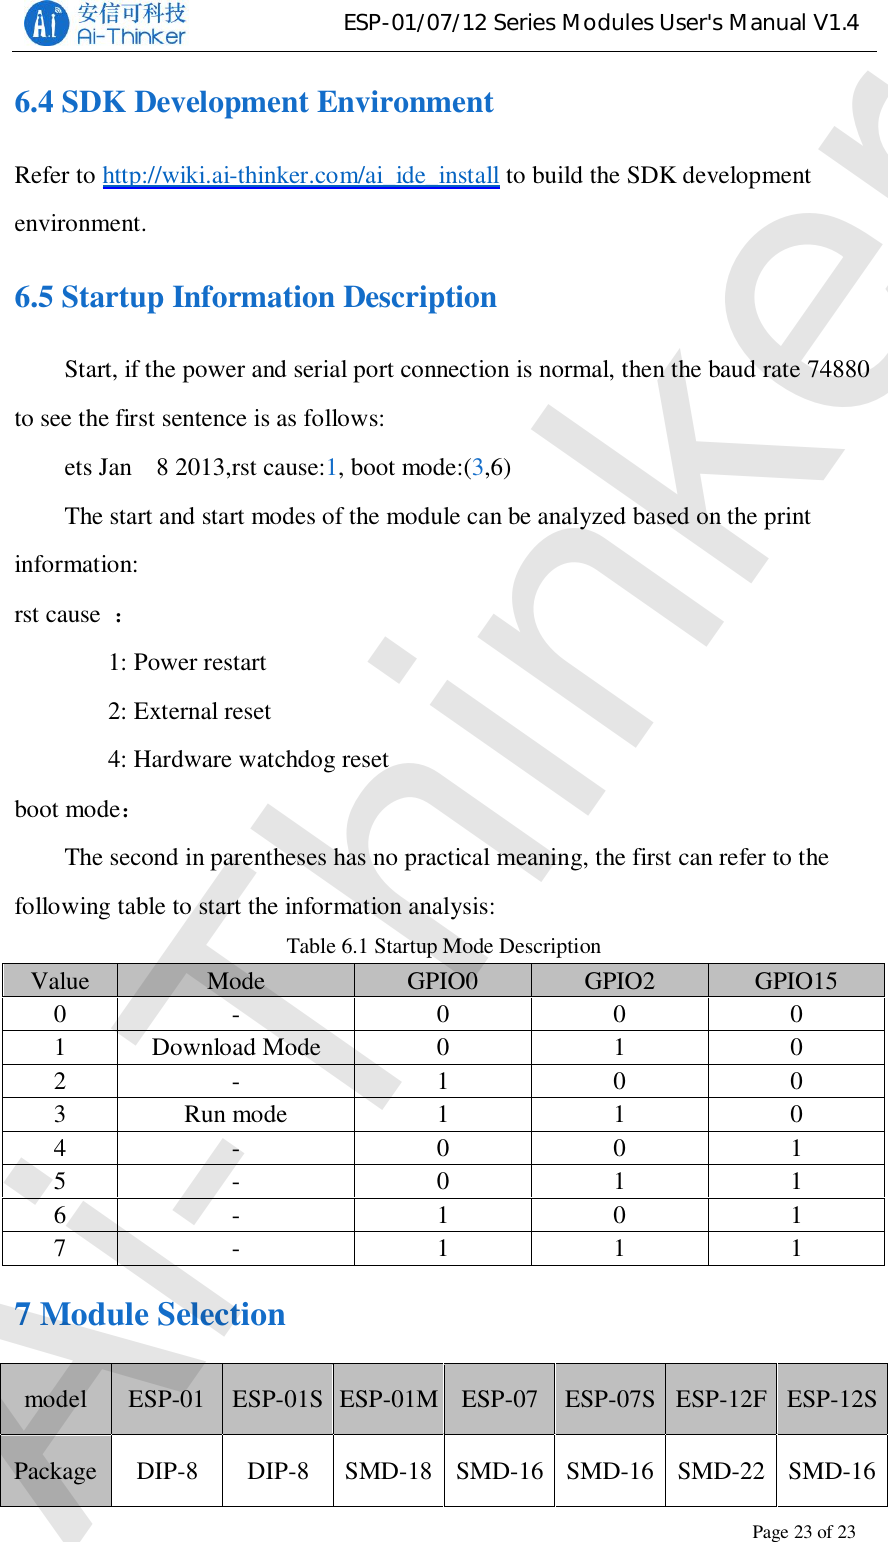 ESP-01/07/12 Series Modules User&apos;s Manual V1.4Copyright © 2017 Shenzhen Ai-Thinker Technology Co., Ltd All Rights ReservedPage23of236.4 SDK Development EnvironmentRefer to http://wiki.ai-thinker.com/ai_ide_install to build the SDK developmentenvironment.6.5 Startup Information DescriptionStart, if the power and serial port connection is normal, then the baud rate 74880to see the first sentence is as follows:ets Jan   8 2013,rst cause:1, boot mode:(3,6)The start and start modes of the module can be analyzed based on the printinformation:rst cause 1: Power restart2: External reset4: Hardware watchdog resetboot modeThe second in parentheses has no practical meaning, the first can refer to thefollowing table to start the information analysis:Table 6.1 Startup Mode DescriptionValue Mode GPIO0 GPIO2 GPIO150 - 0 0 01Download Mode 0 1 02 - 1 0 03Run mode 1 1 04 - 0 0 15 - 0 1 16 - 1 0 17 - 1 1 17 Module Selectionmodel ESP-01 ESP-01S ESP-01M ESP-07 ESP-07S ESP-12F ESP-12SPackage DIP-8  DIP-8 SMD-18 SMD-16 SMD-16 SMD-22 SMD-16Ai-Thinker